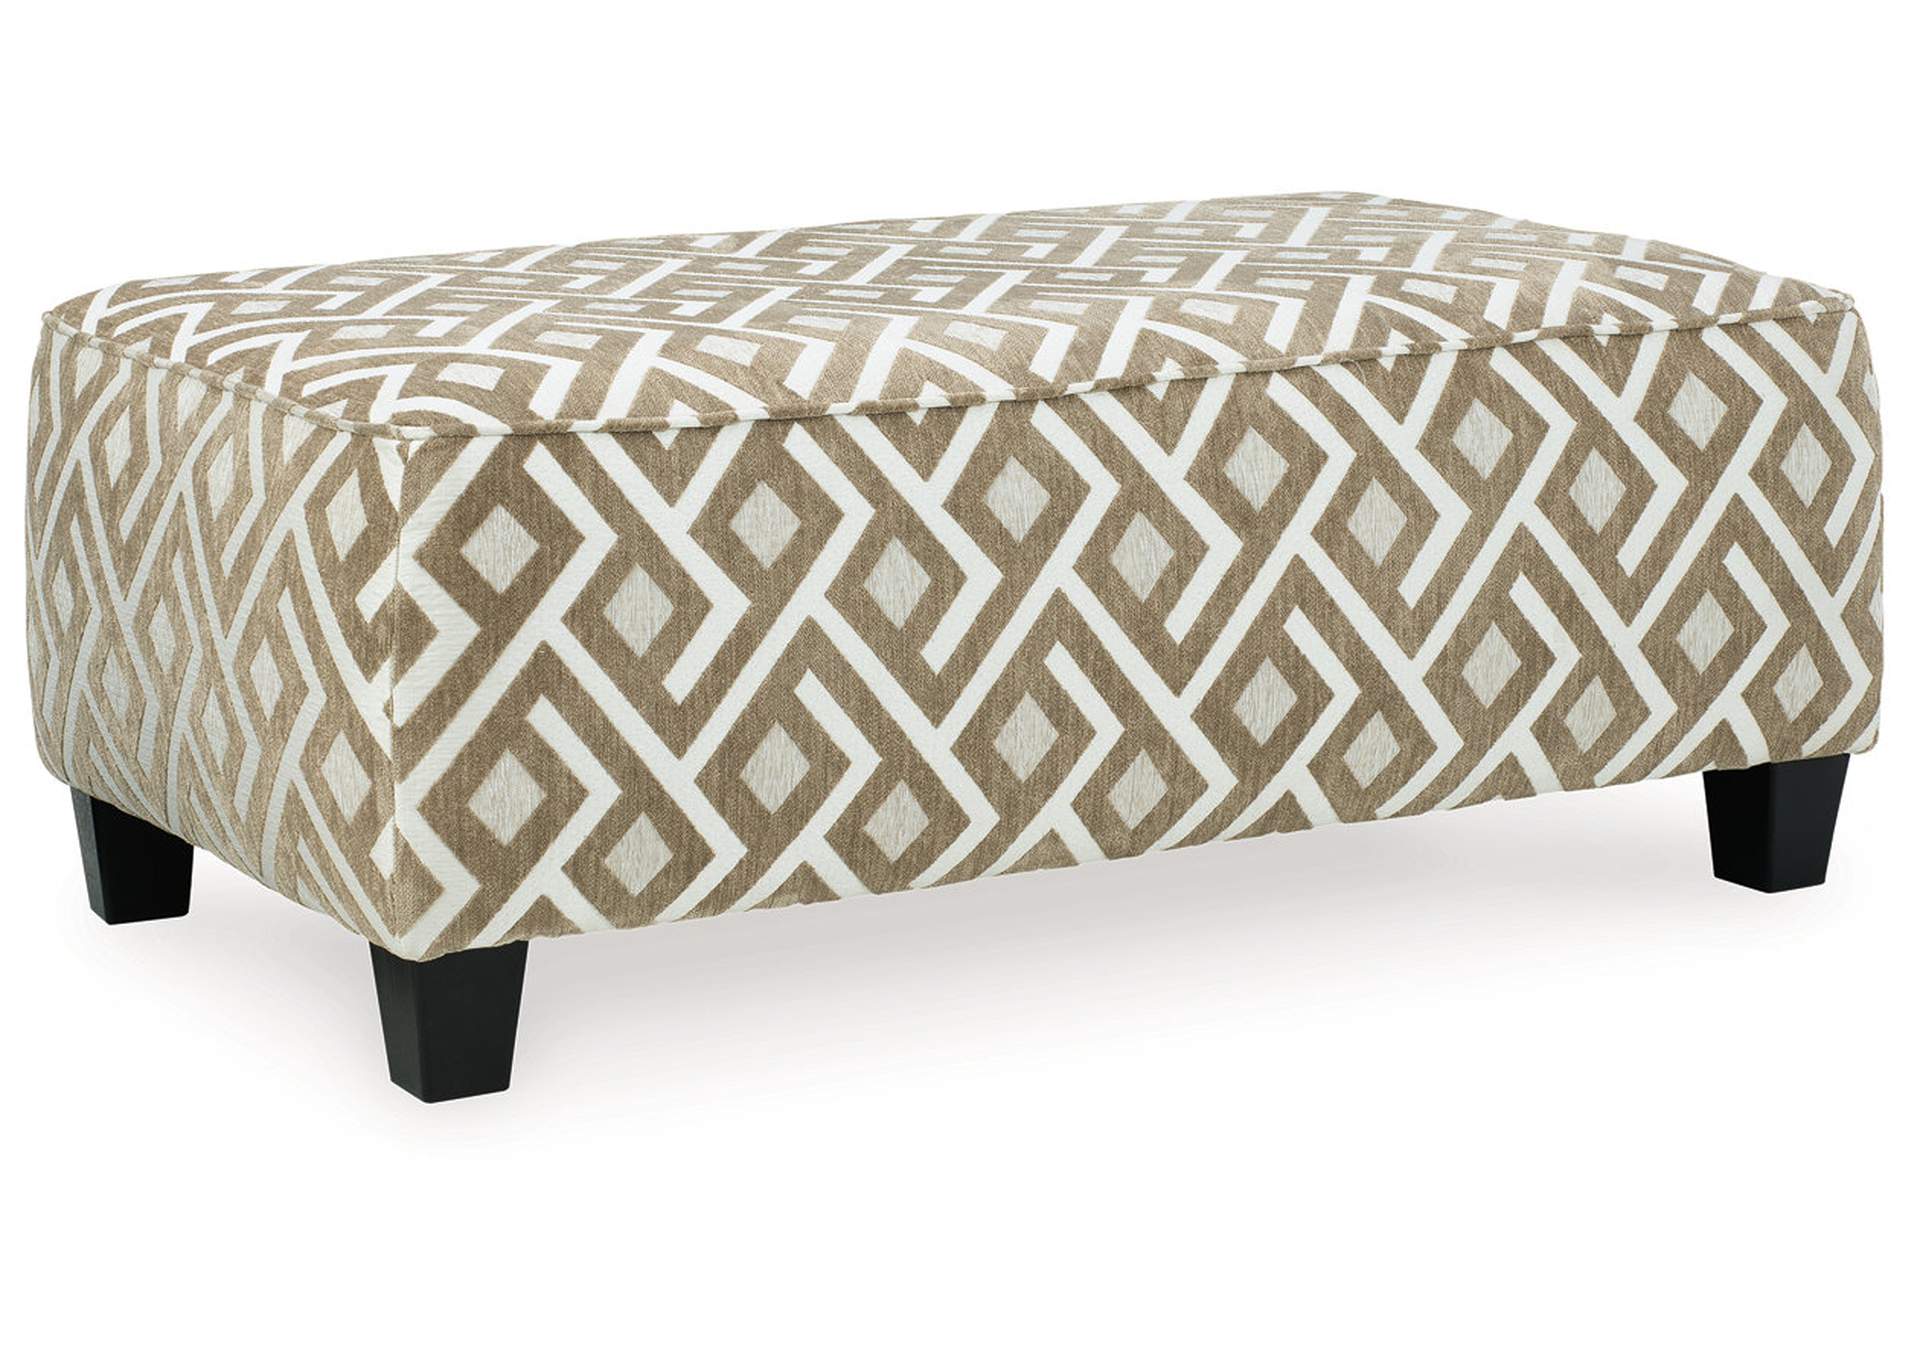 Dovemont Oversized Accent Ottoman,Signature Design By Ashley